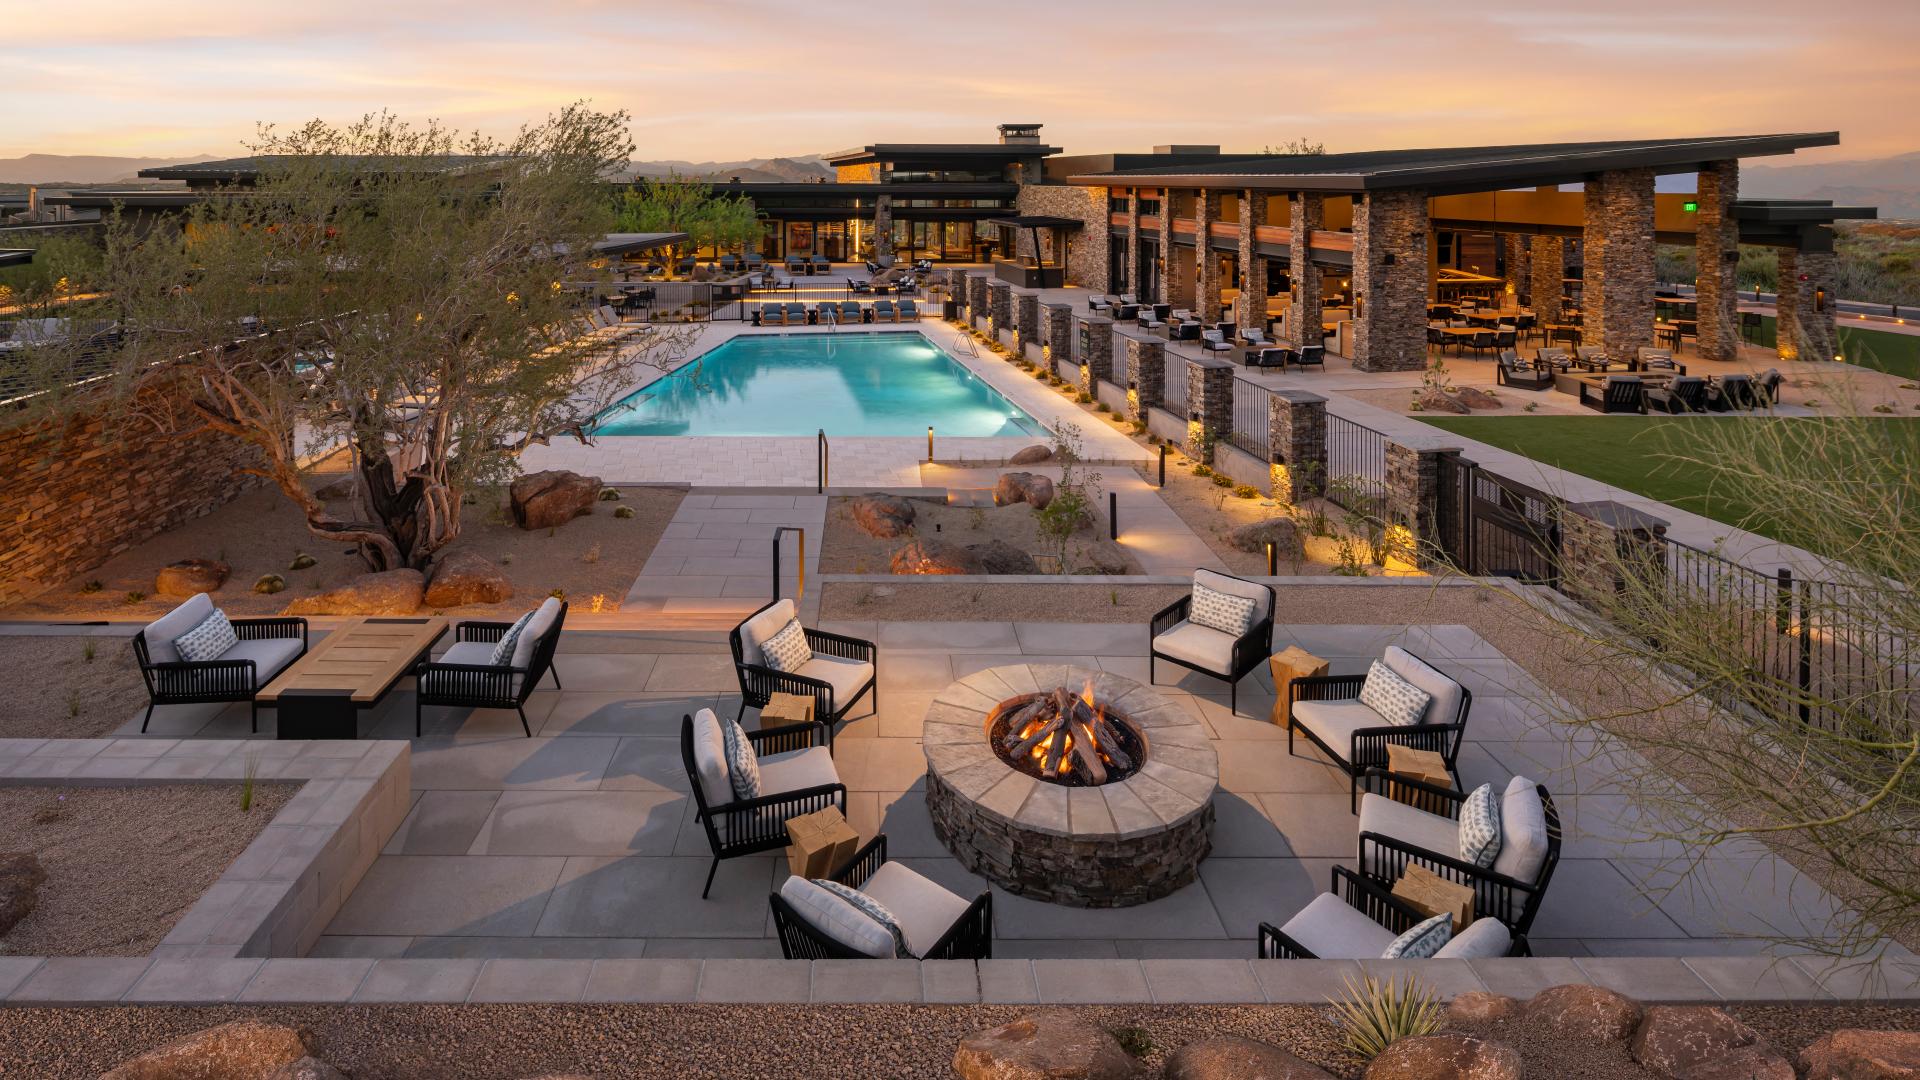 Resort-style pools and outdoor gathering areas